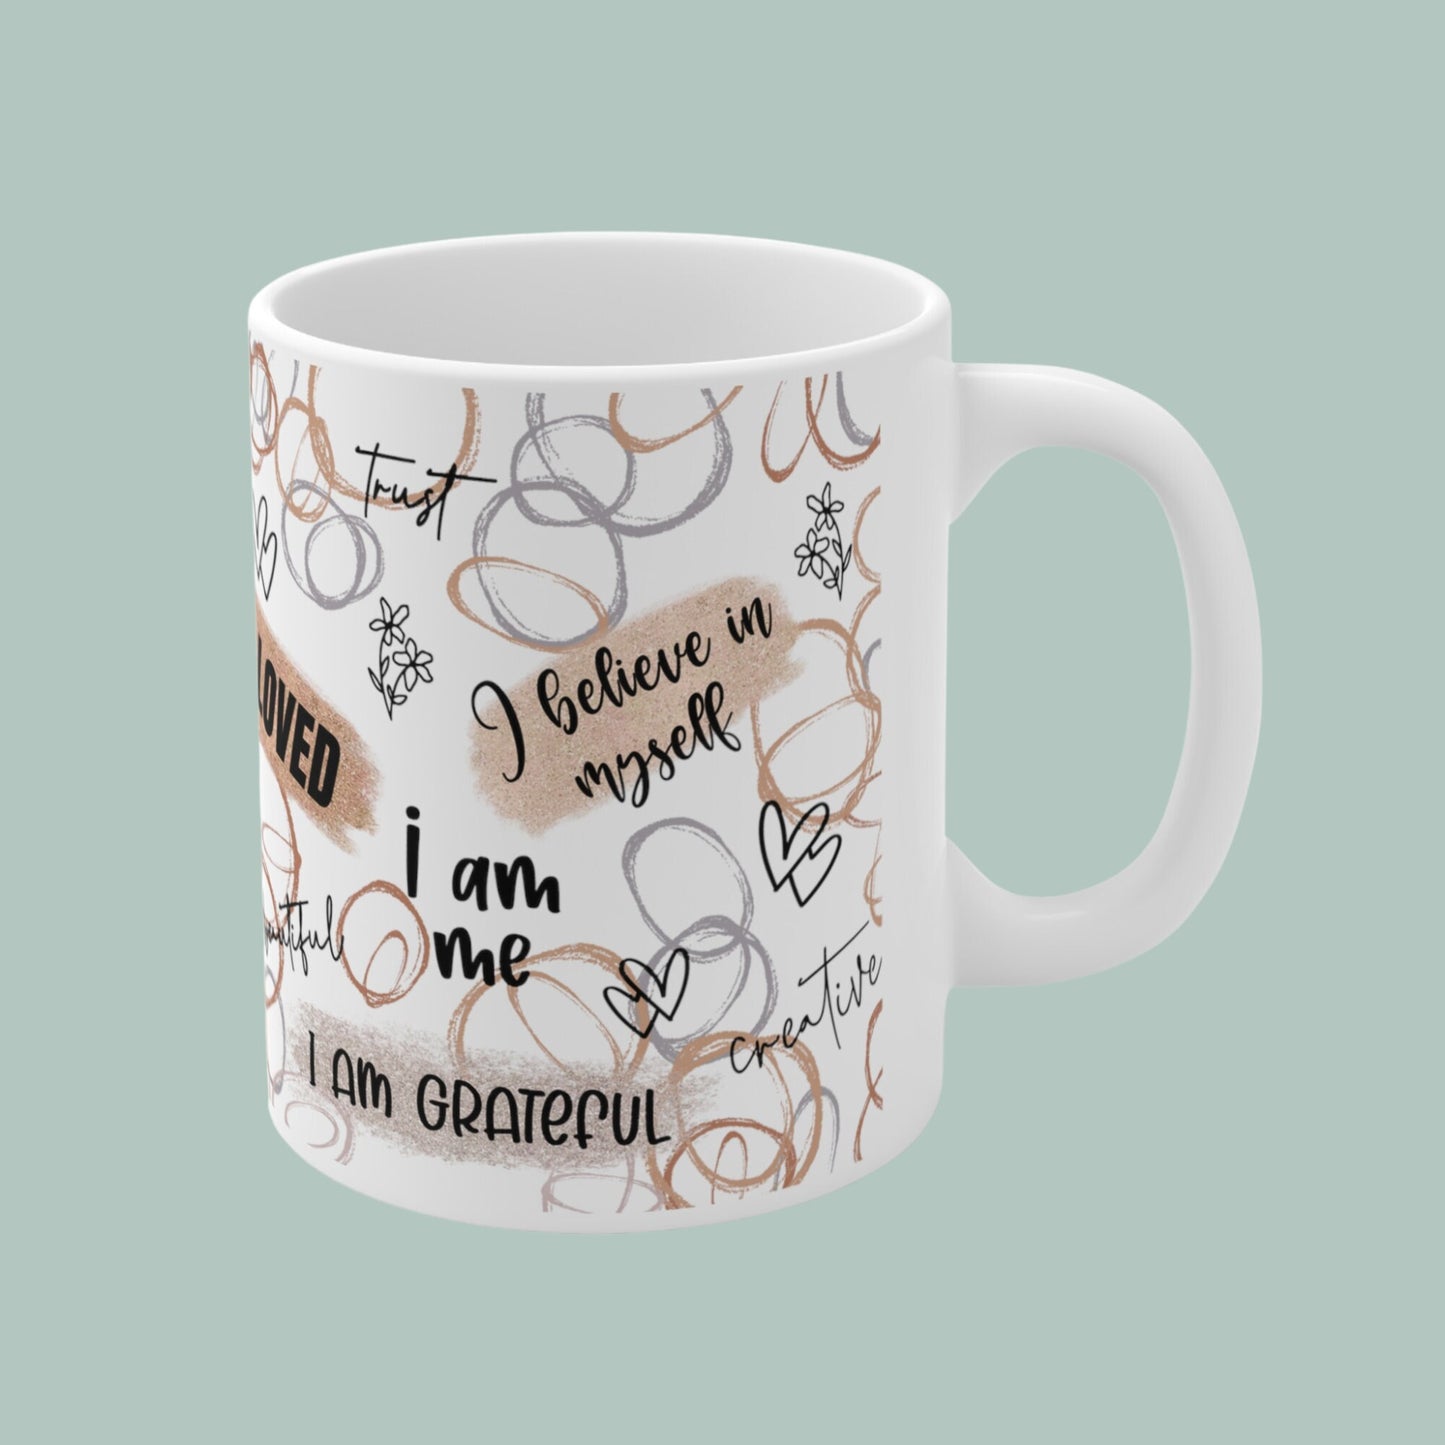 DAILY AFFIRMATION Coffee MUG You Are Special Mug Hot Beverage Cup For Hot Drink Lover Hot Chocolate Tea Coffee Believe In Yourself Positive